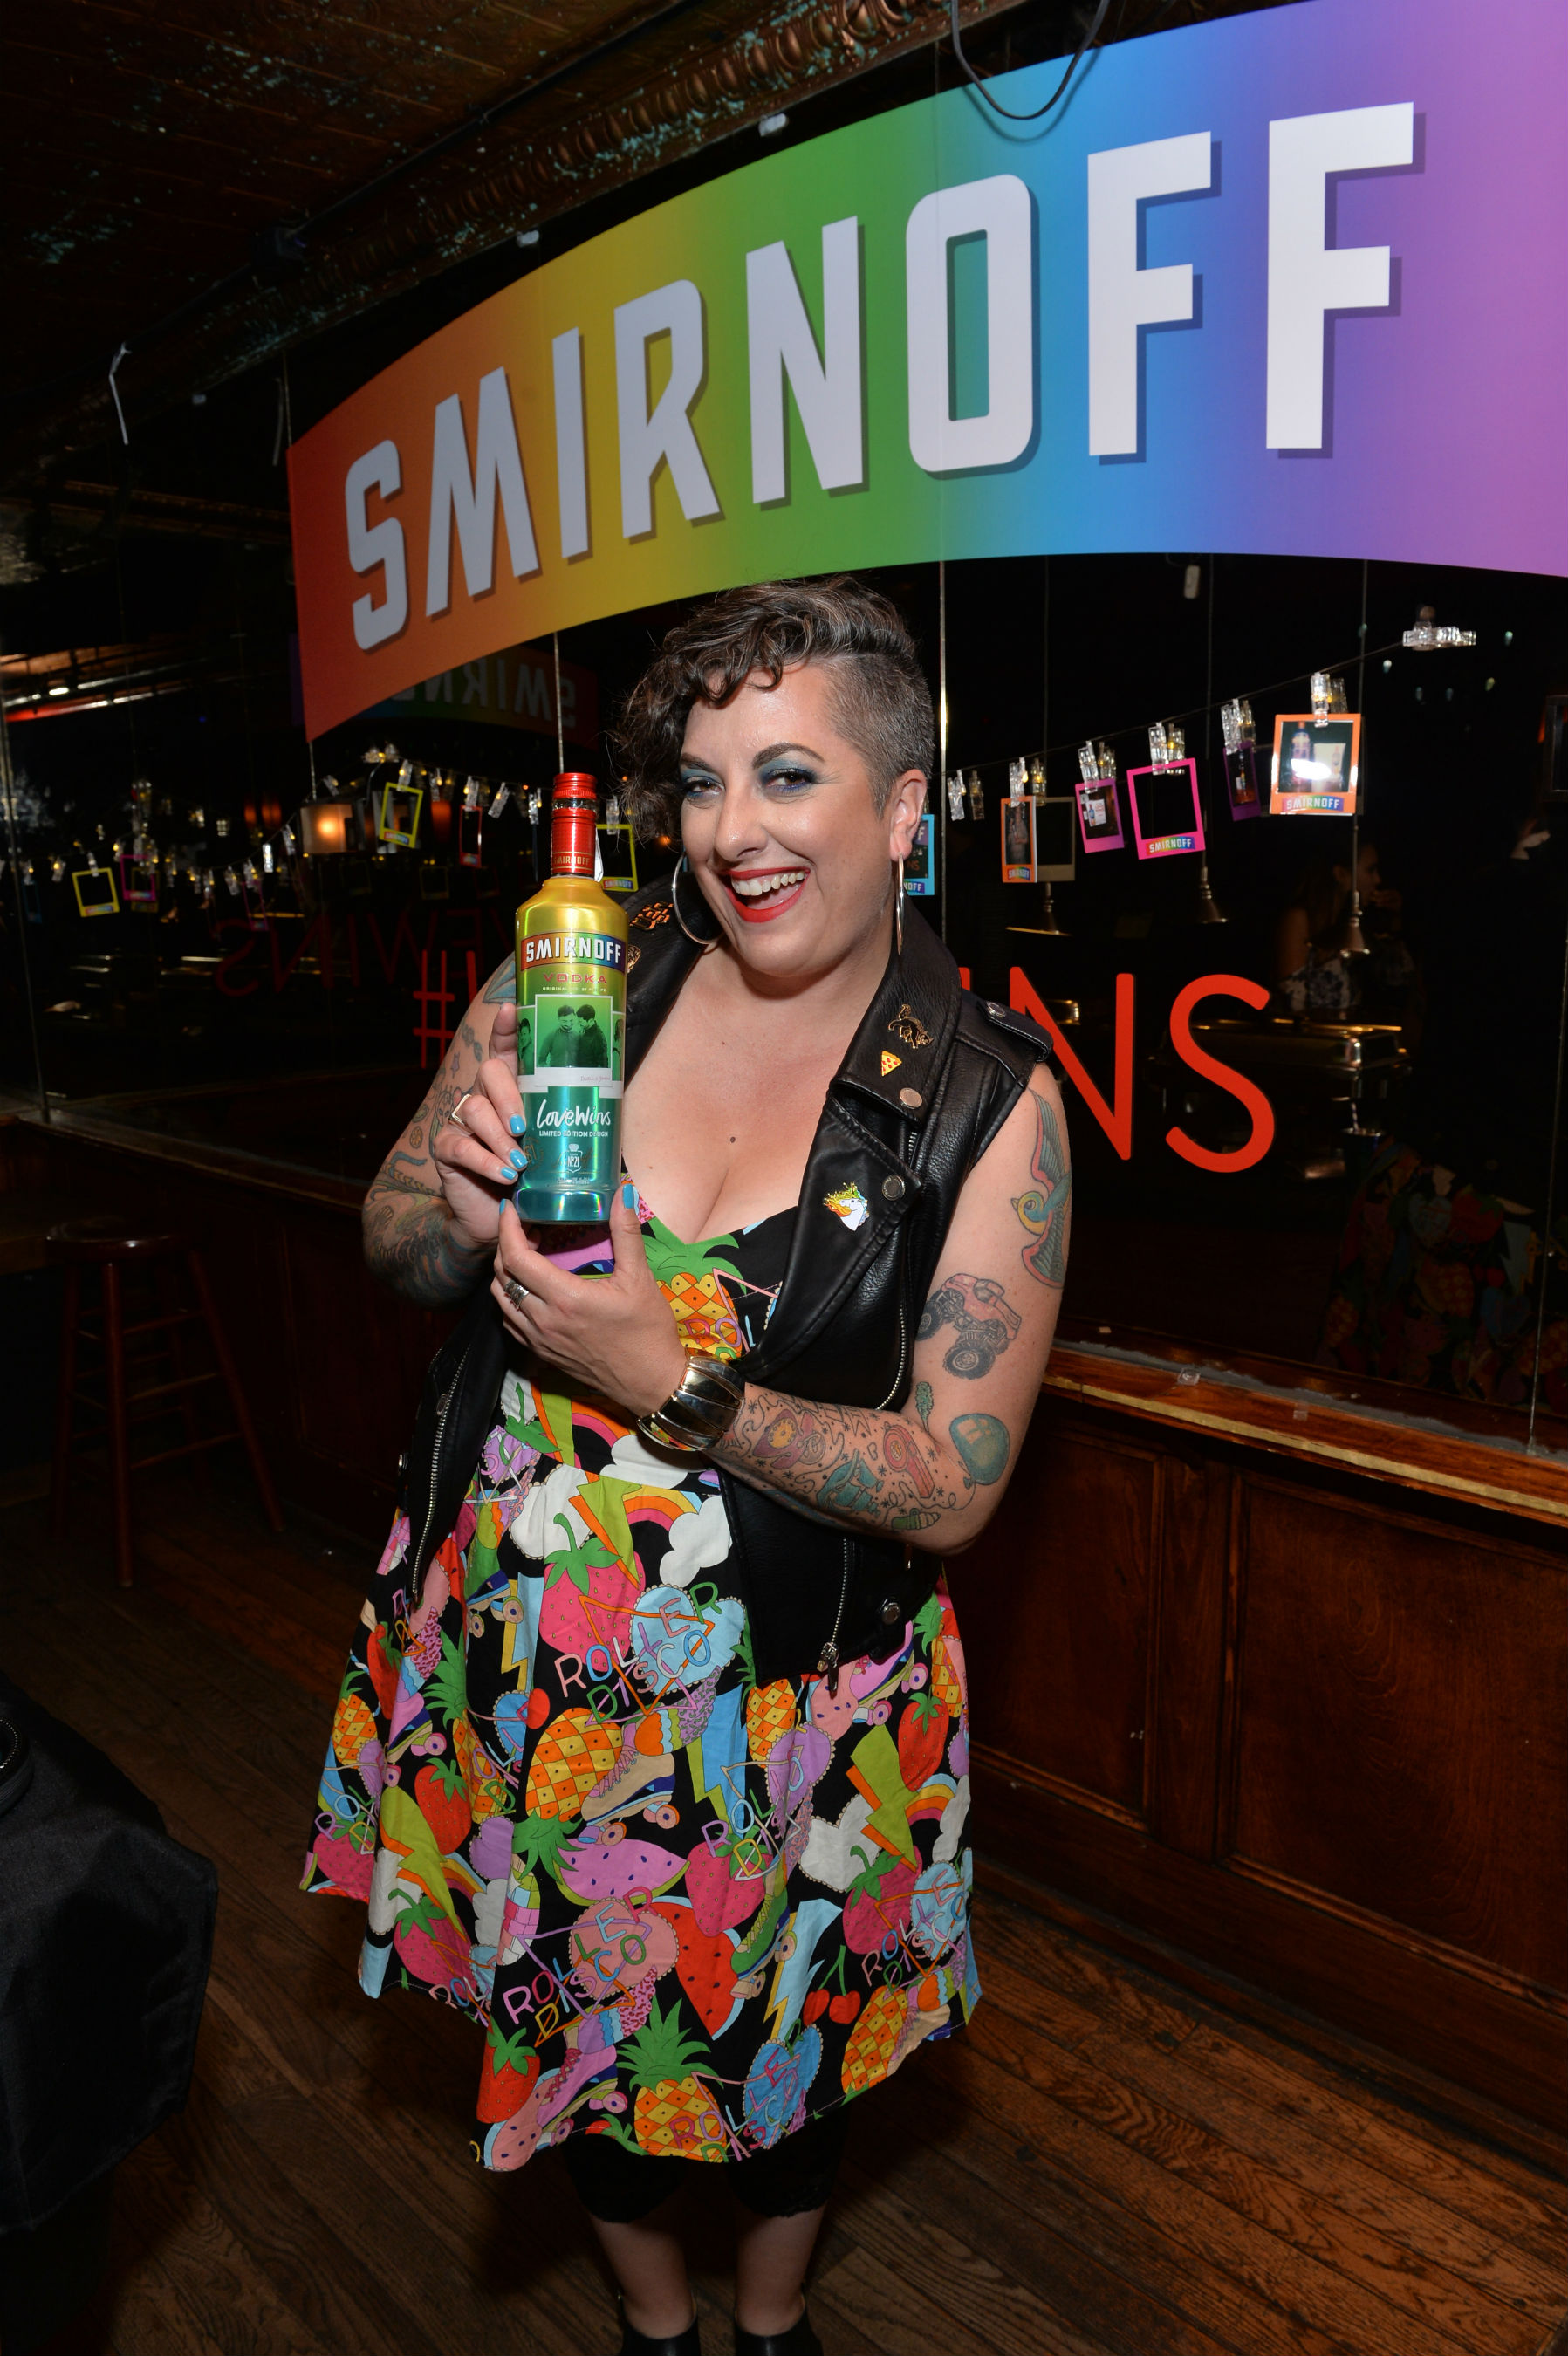 SMIRNOFF launches SMIRNOFF No. 21 Vodka “Love Wins” limited edition bottles featuring photographs taken by Sarah Deragon to celebrate inclusivity and love in all its forms in New York City on Thursday, May 18, 2017.